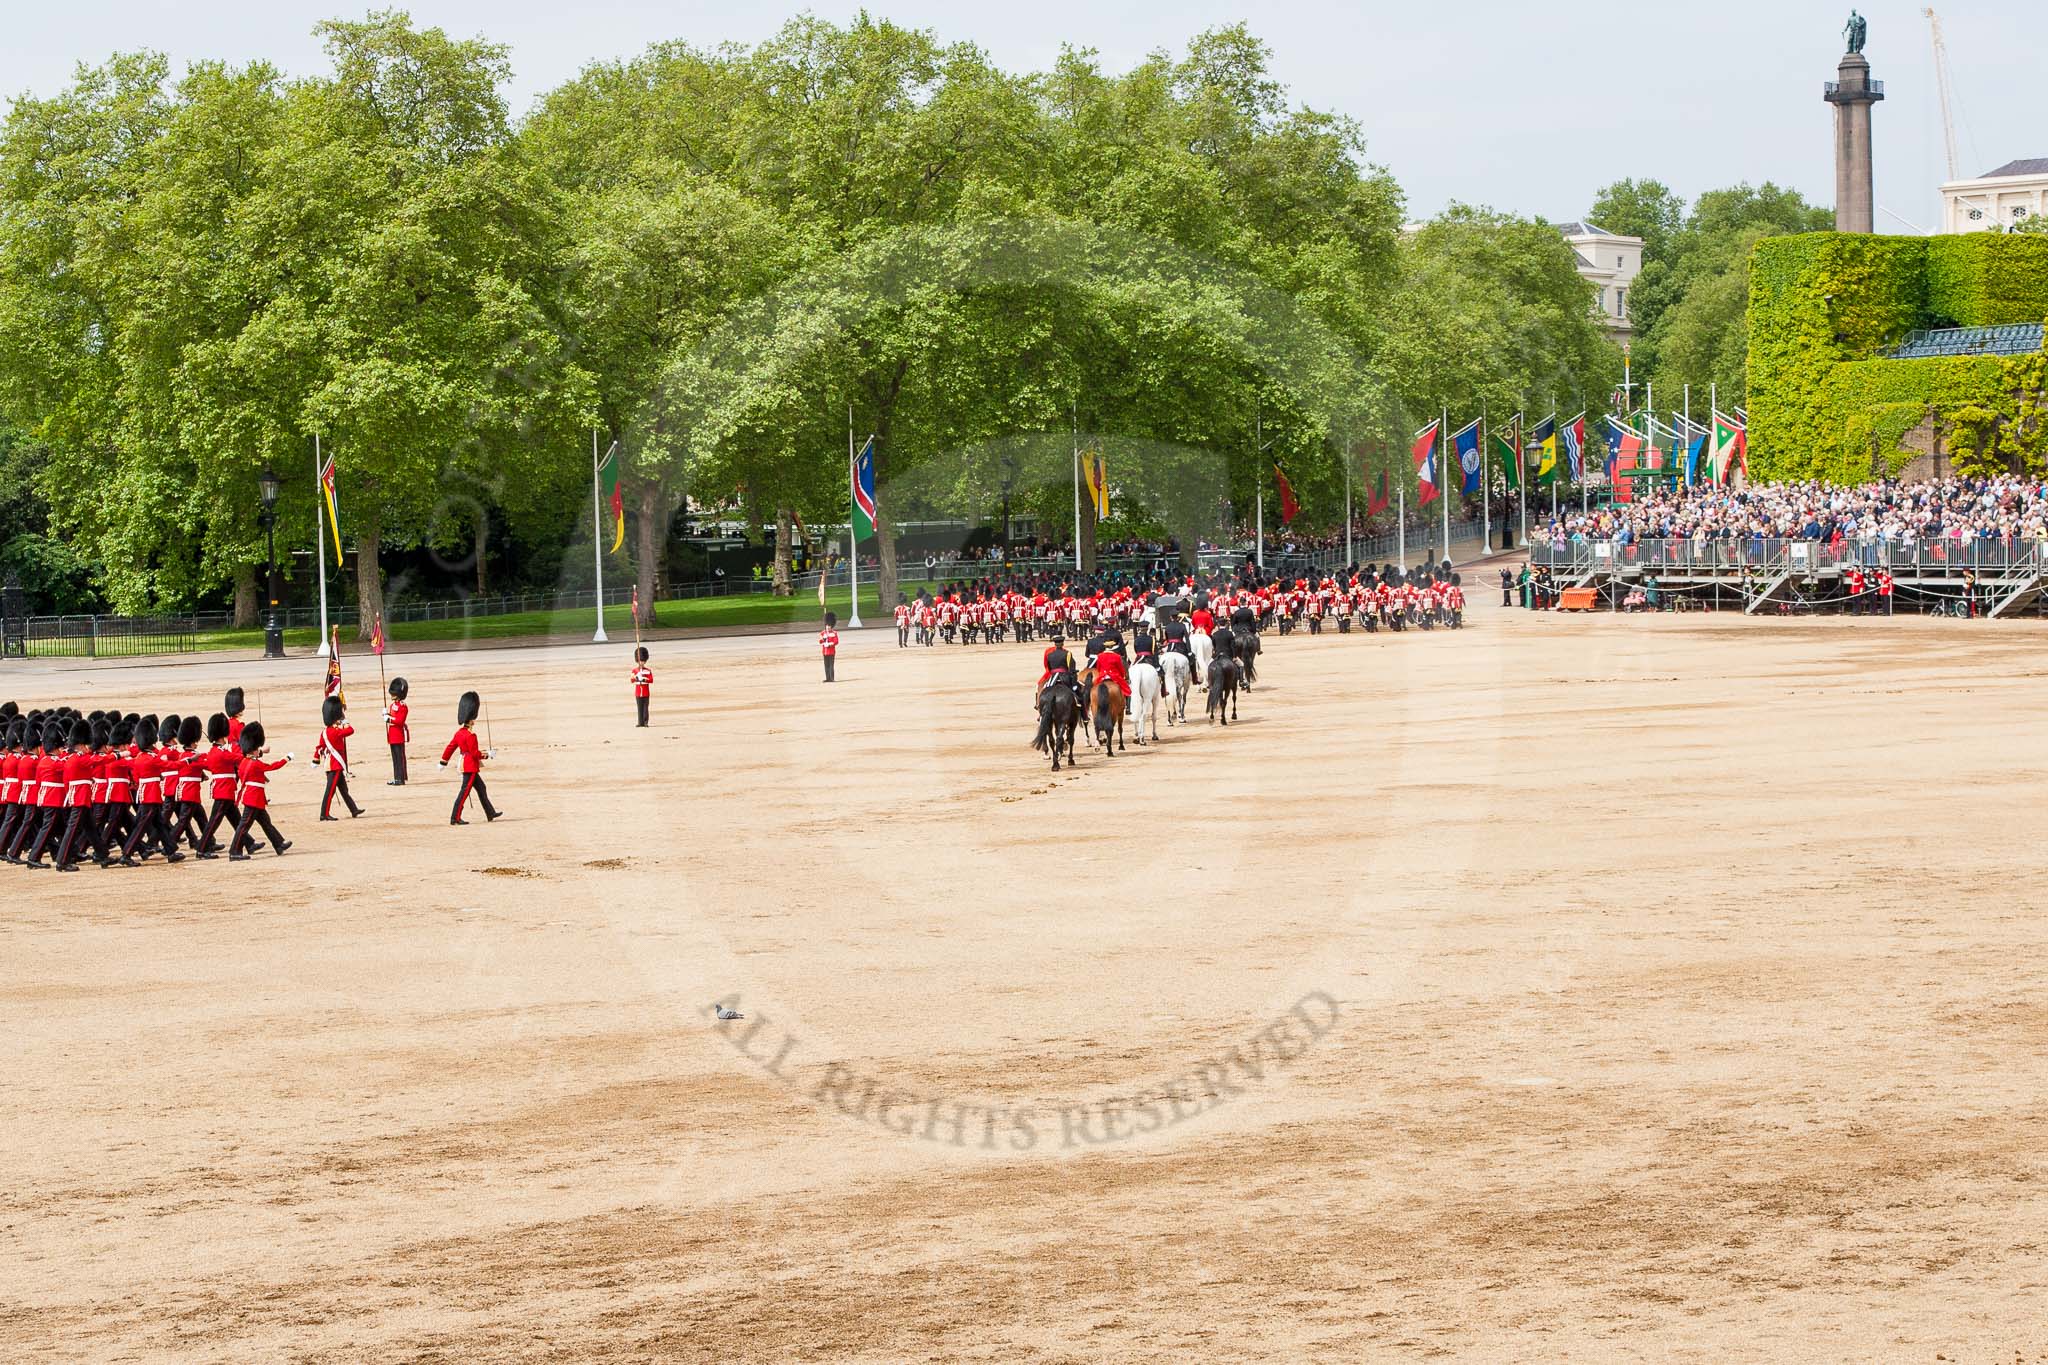 Major General's Review 2013: The March Off - the Massed Bands are leaving towards The Mall, followed by the coach that will carry HM The Queen and HRH The Duke of Kent..
Horse Guards Parade, Westminster,
London SW1,

United Kingdom,
on 01 June 2013 at 12:08, image #718